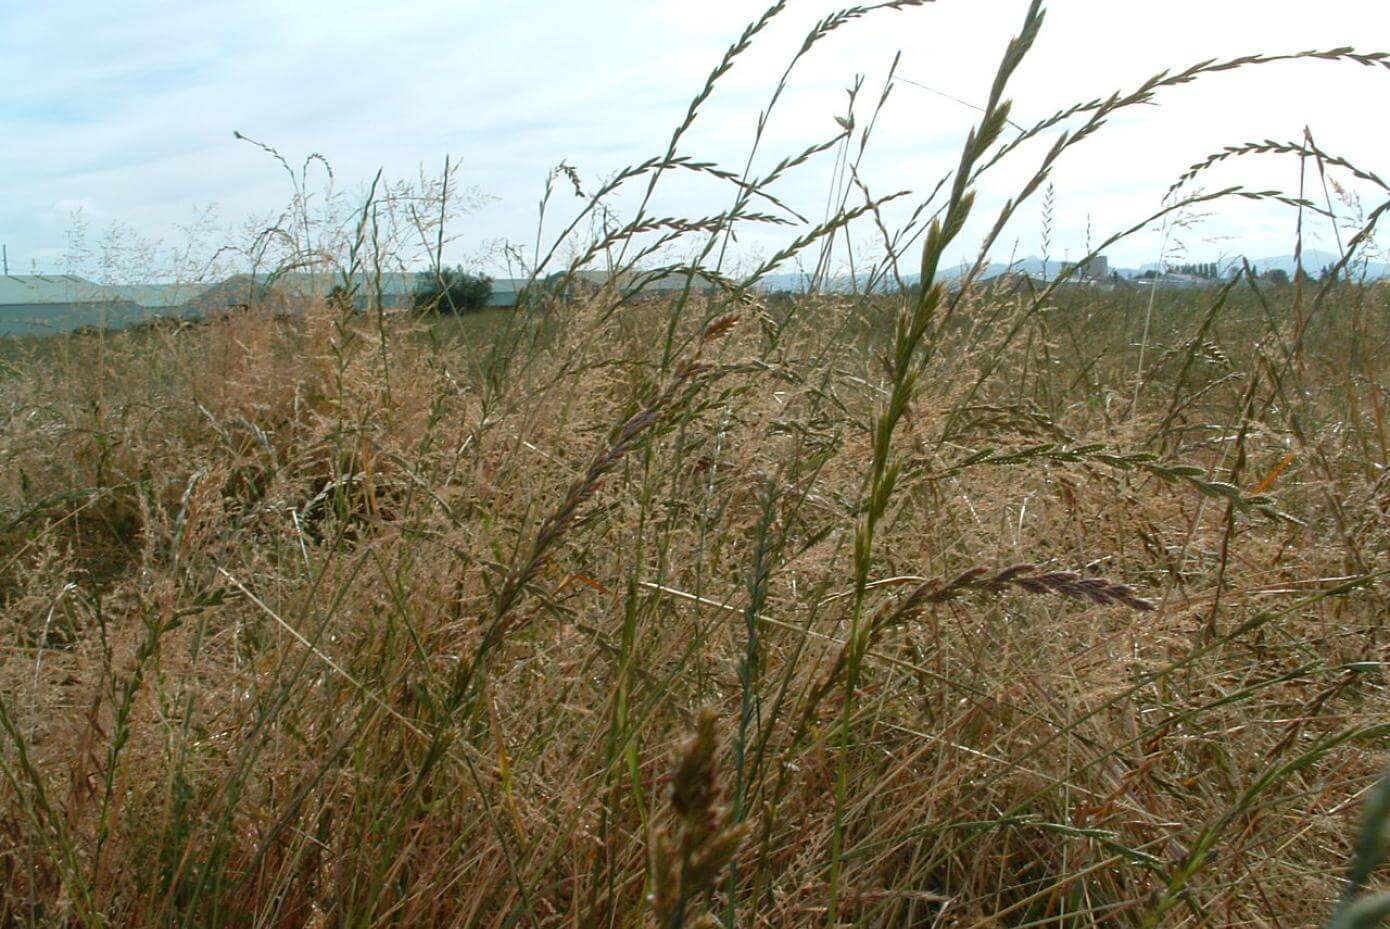 Grass seed heads in a field